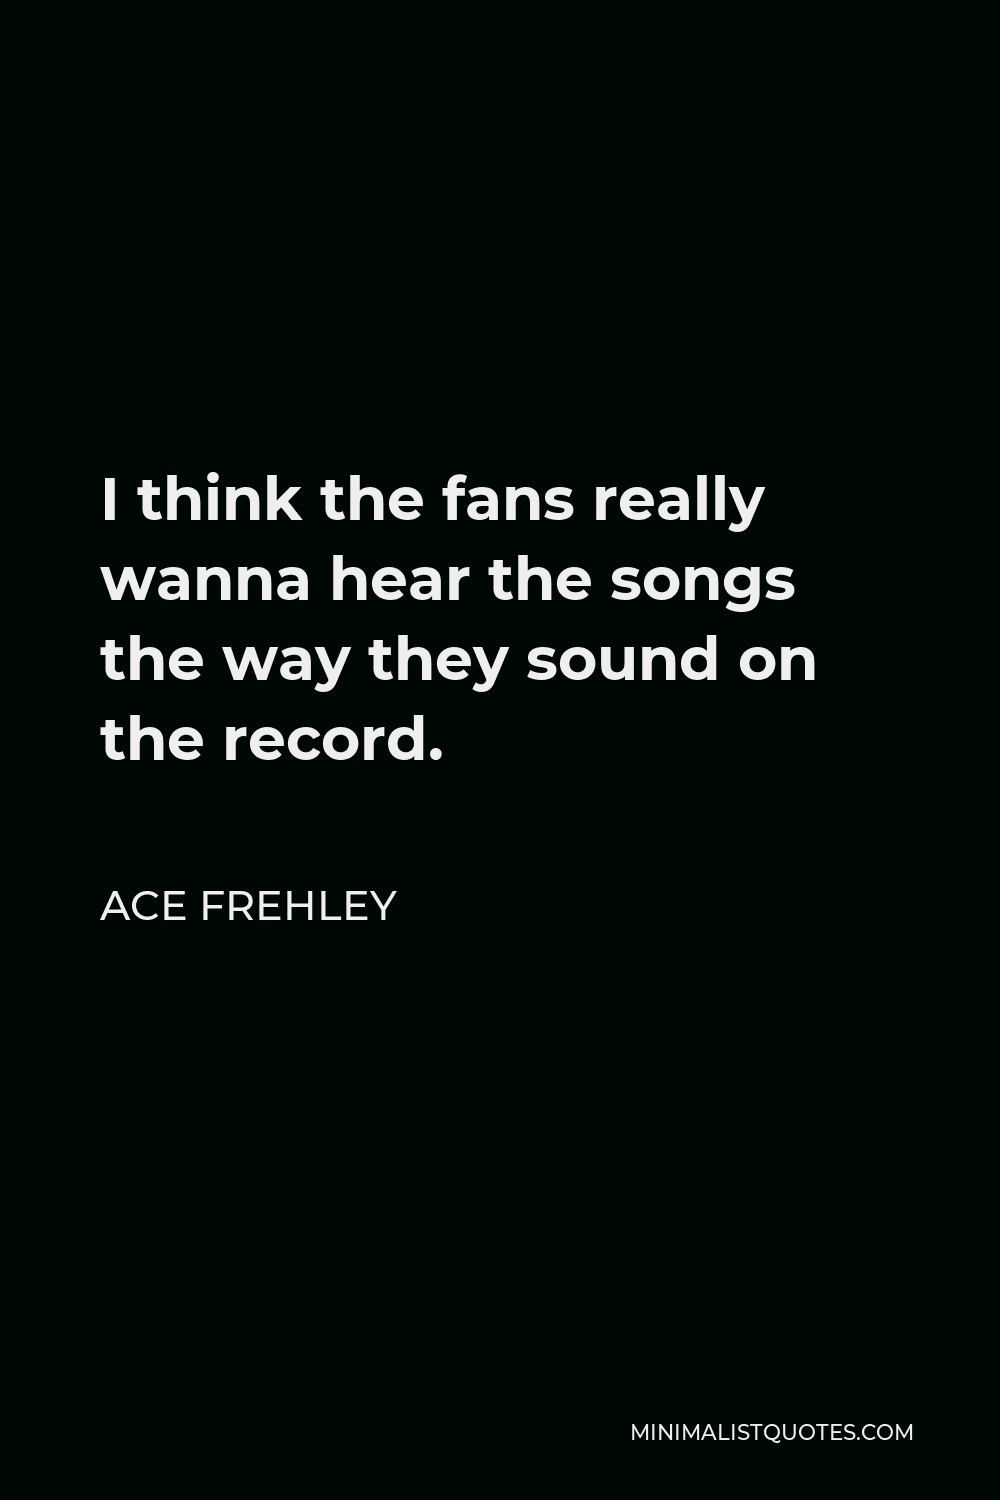 Ace Frehley Quote - I think the fans really wanna hear the songs the way they sound on the record.